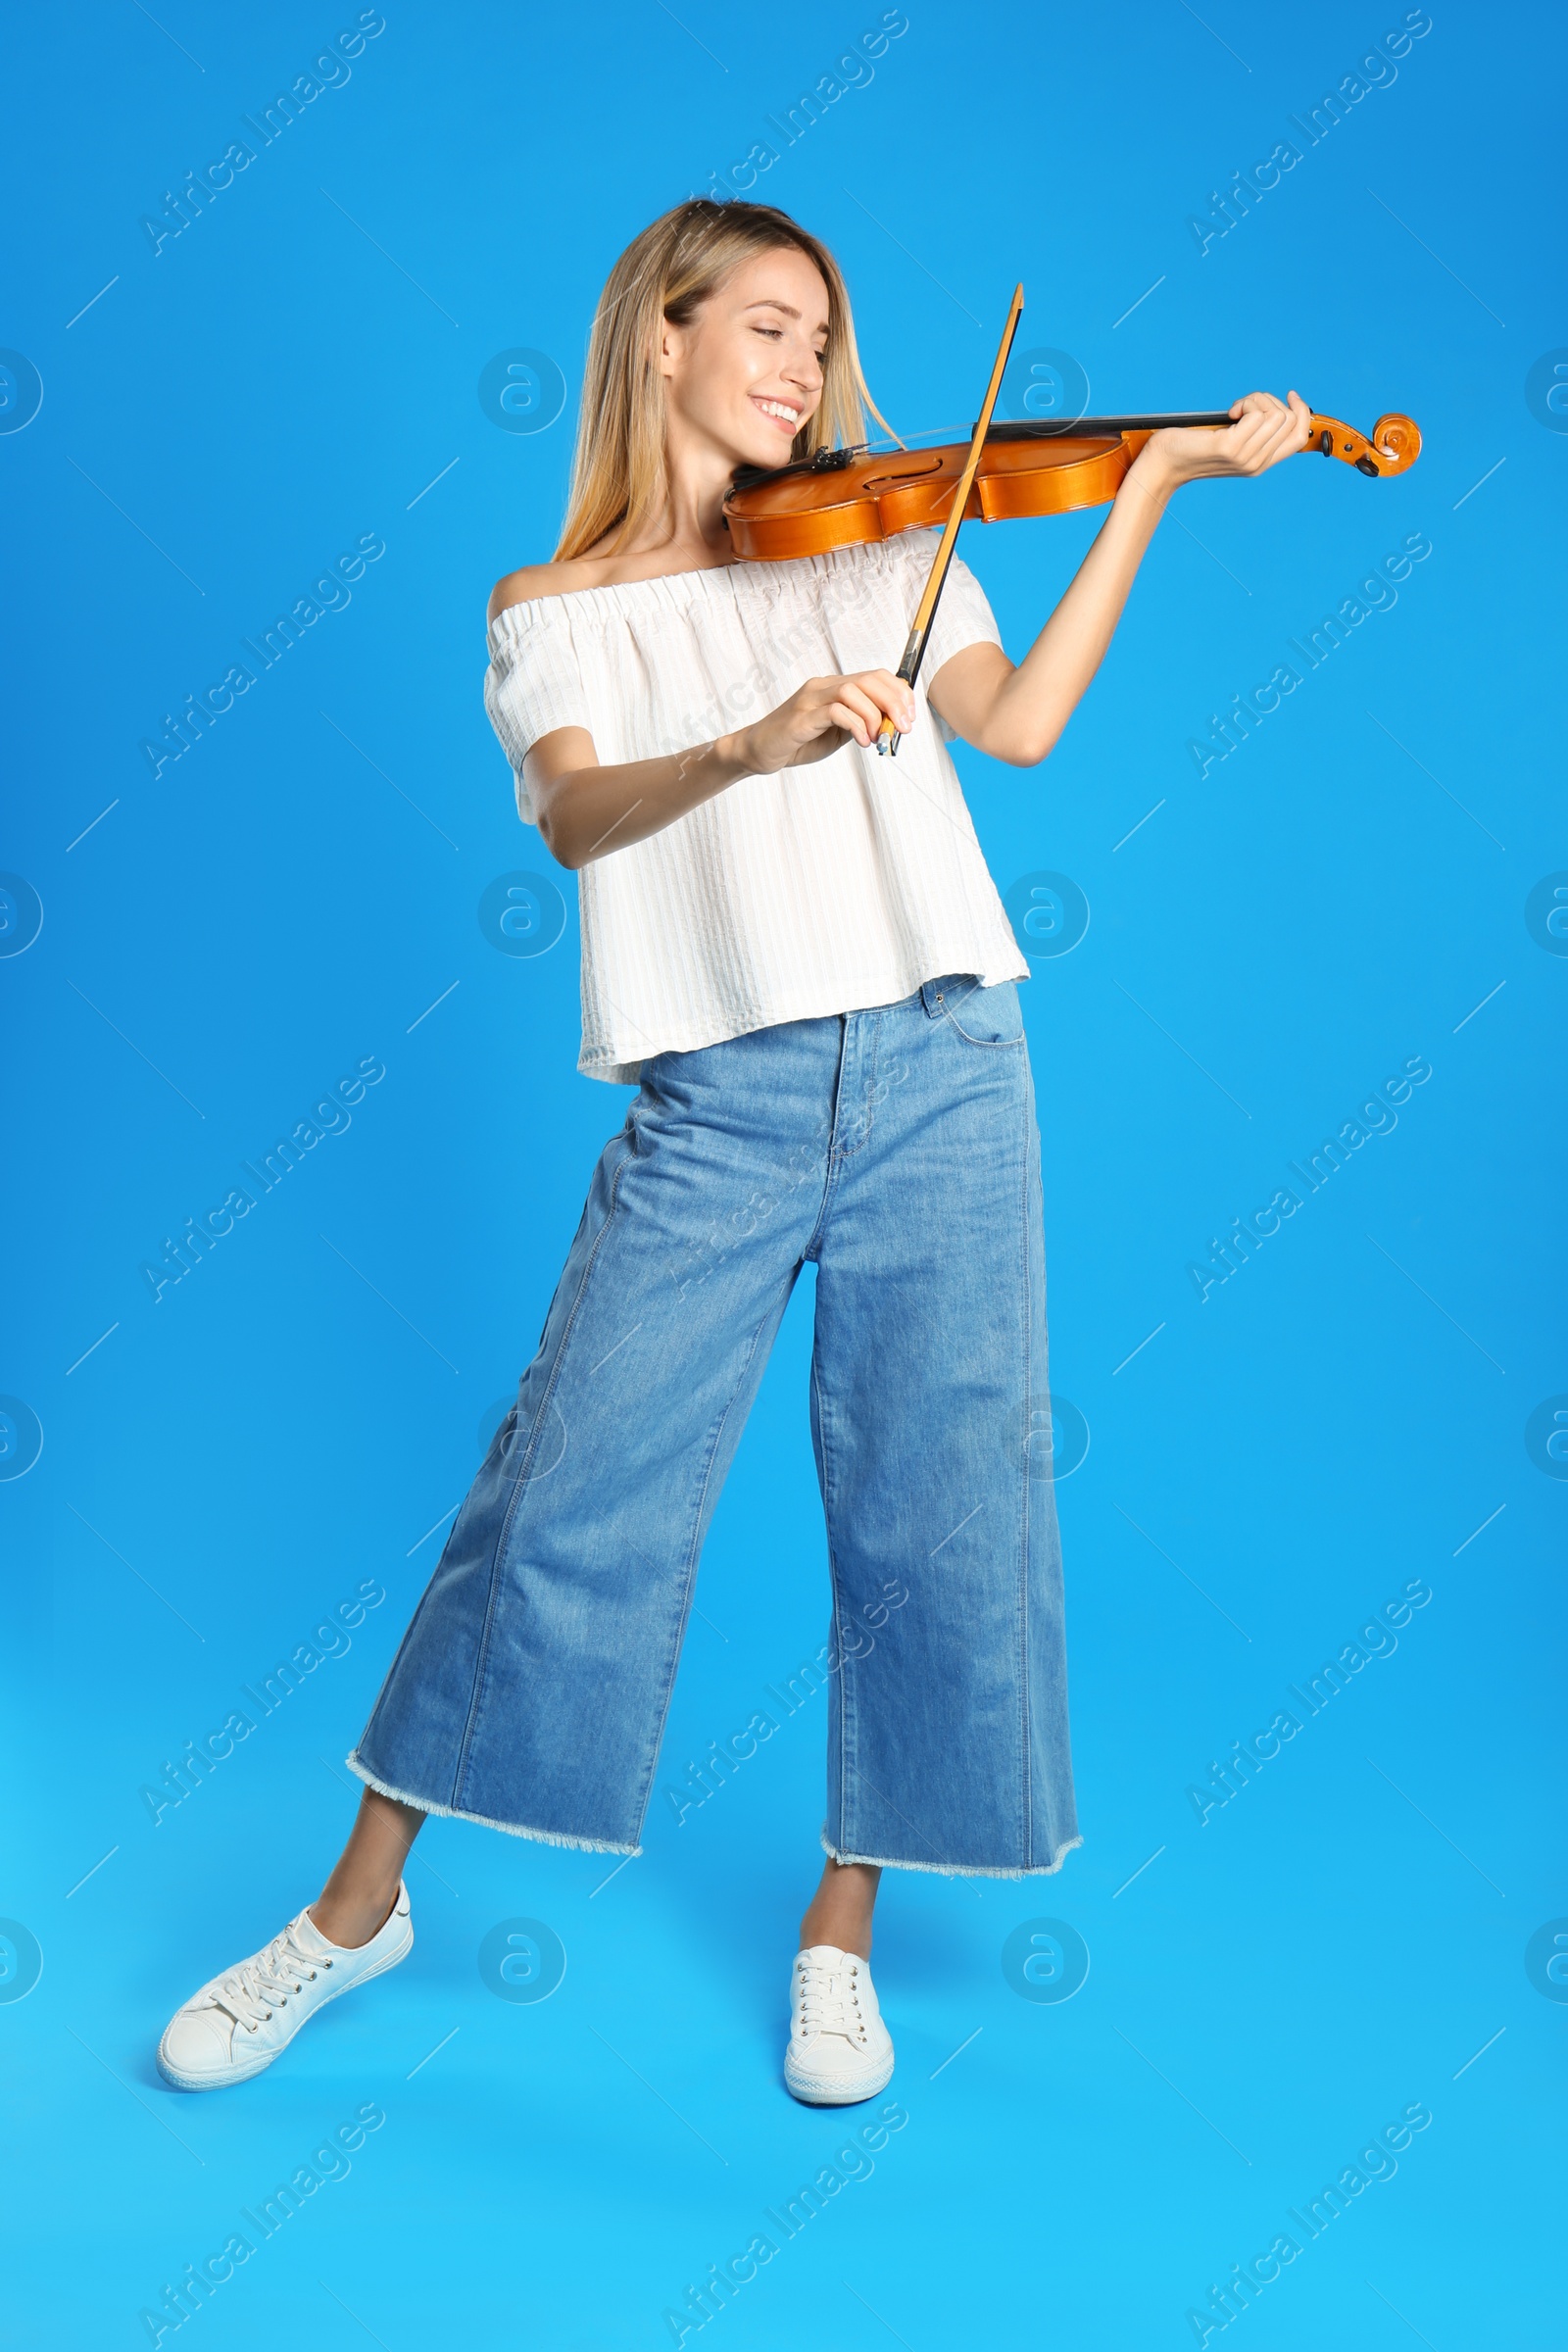 Photo of Beautiful woman playing violin on blue background